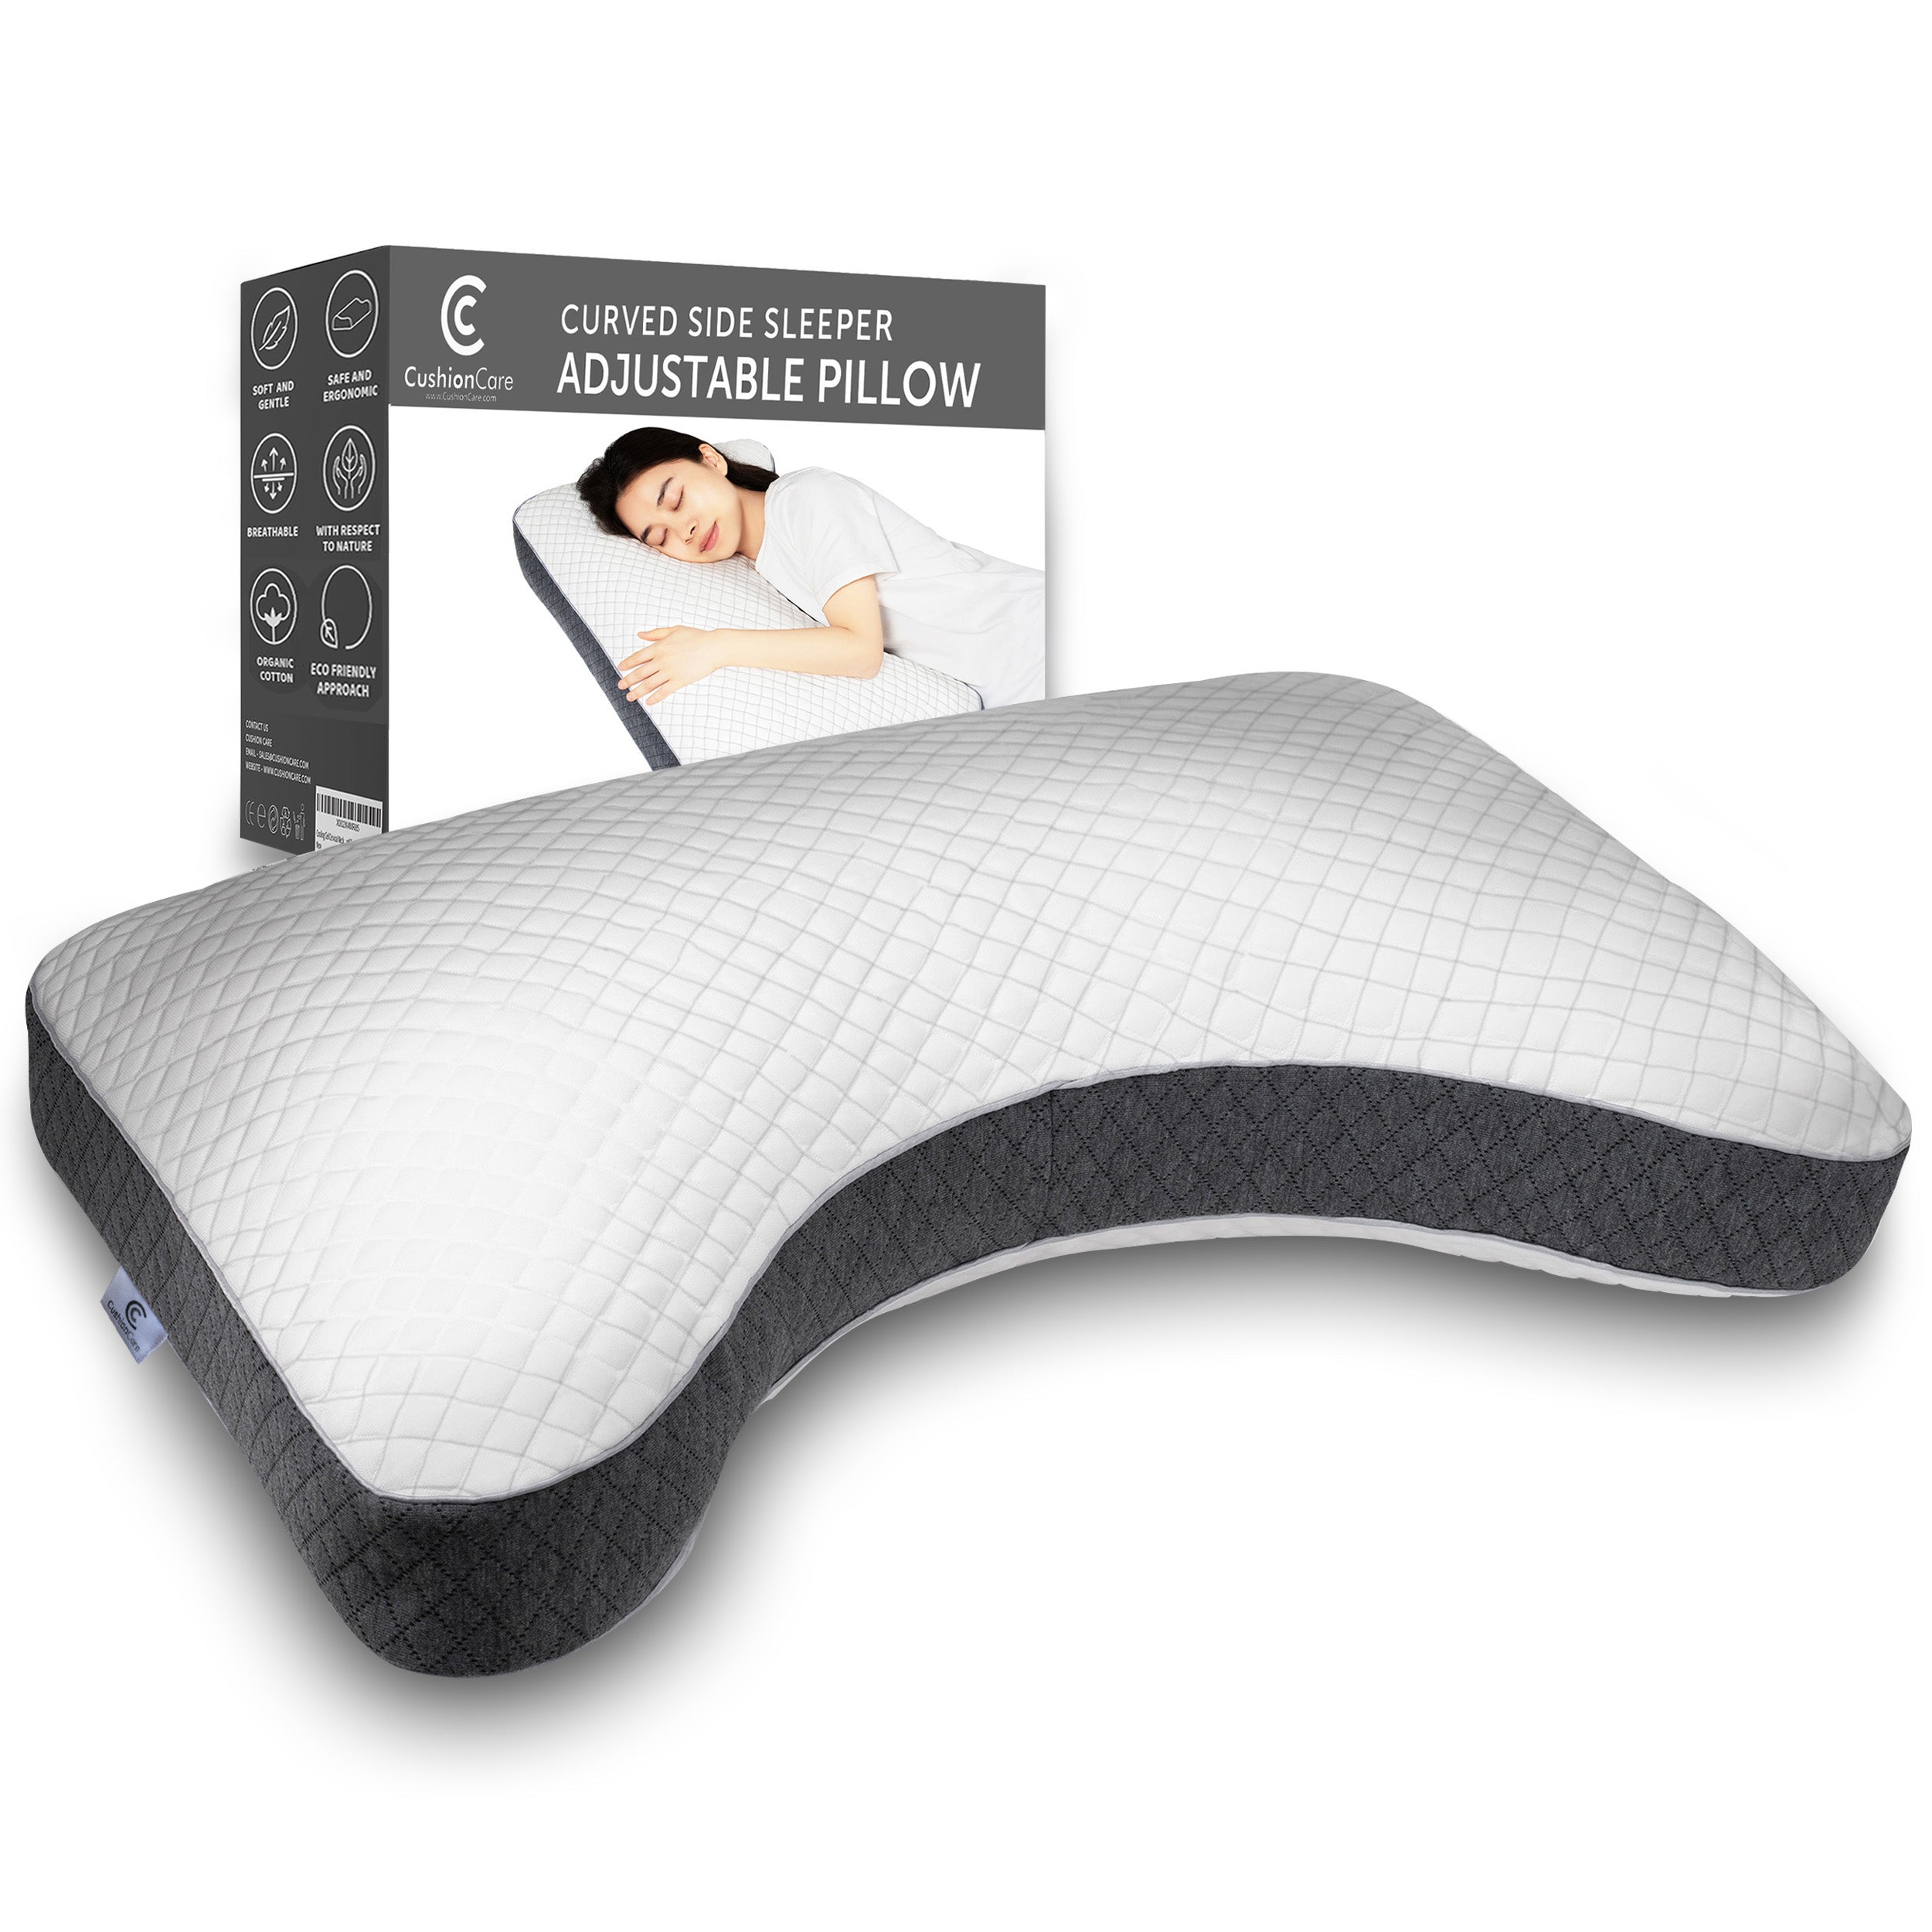 PureComfort Curved Pillow - Adjustable Side Sleeper Pillow for